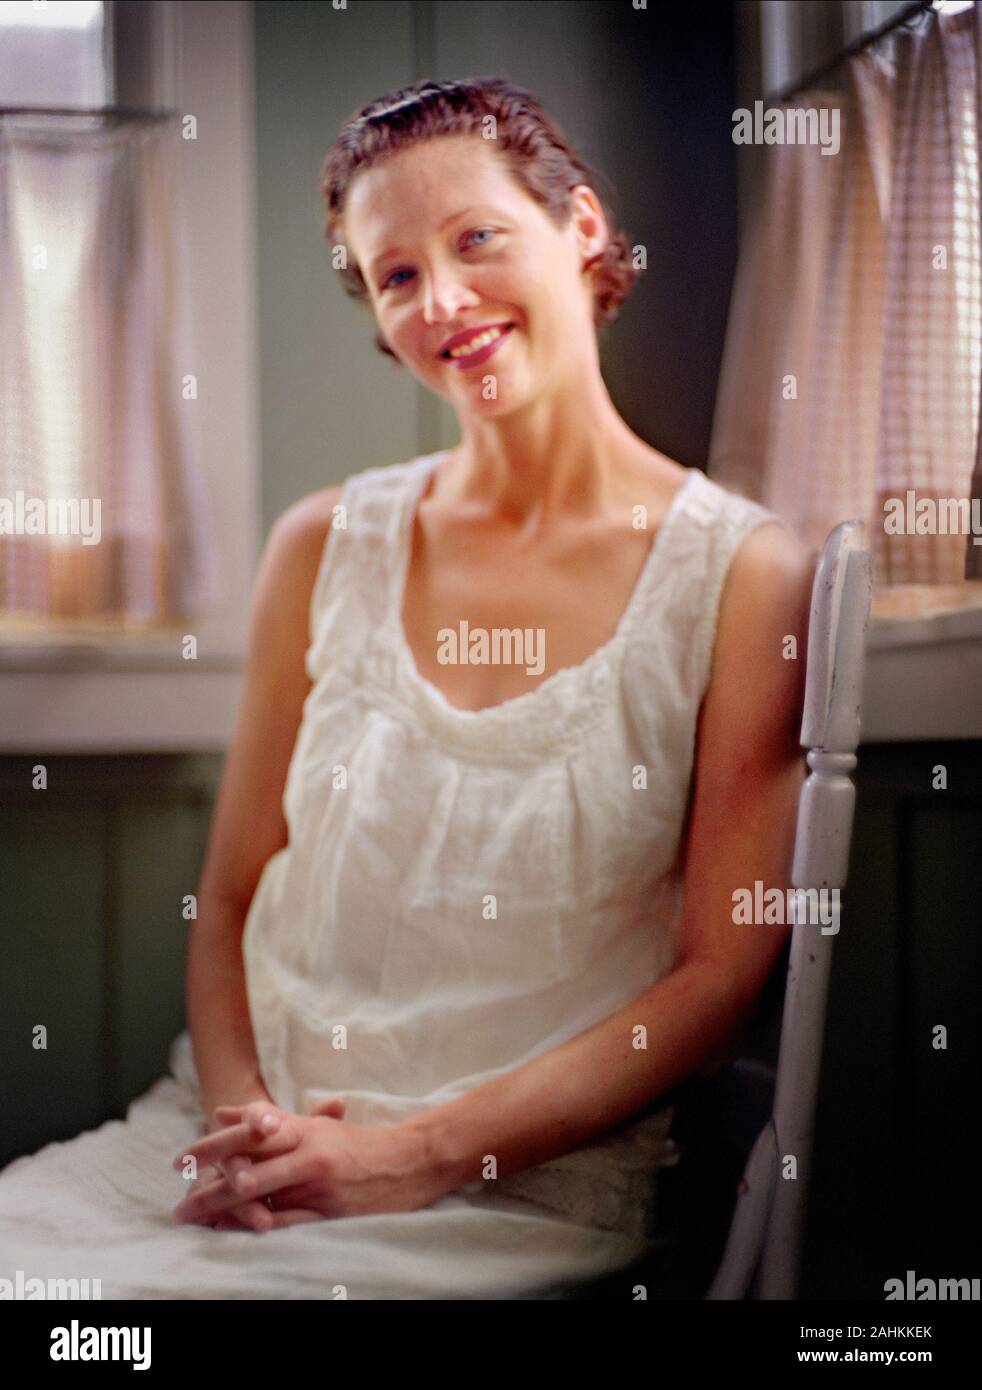 A woman is sitting on a chair inside her house and smiling. Stock Photo